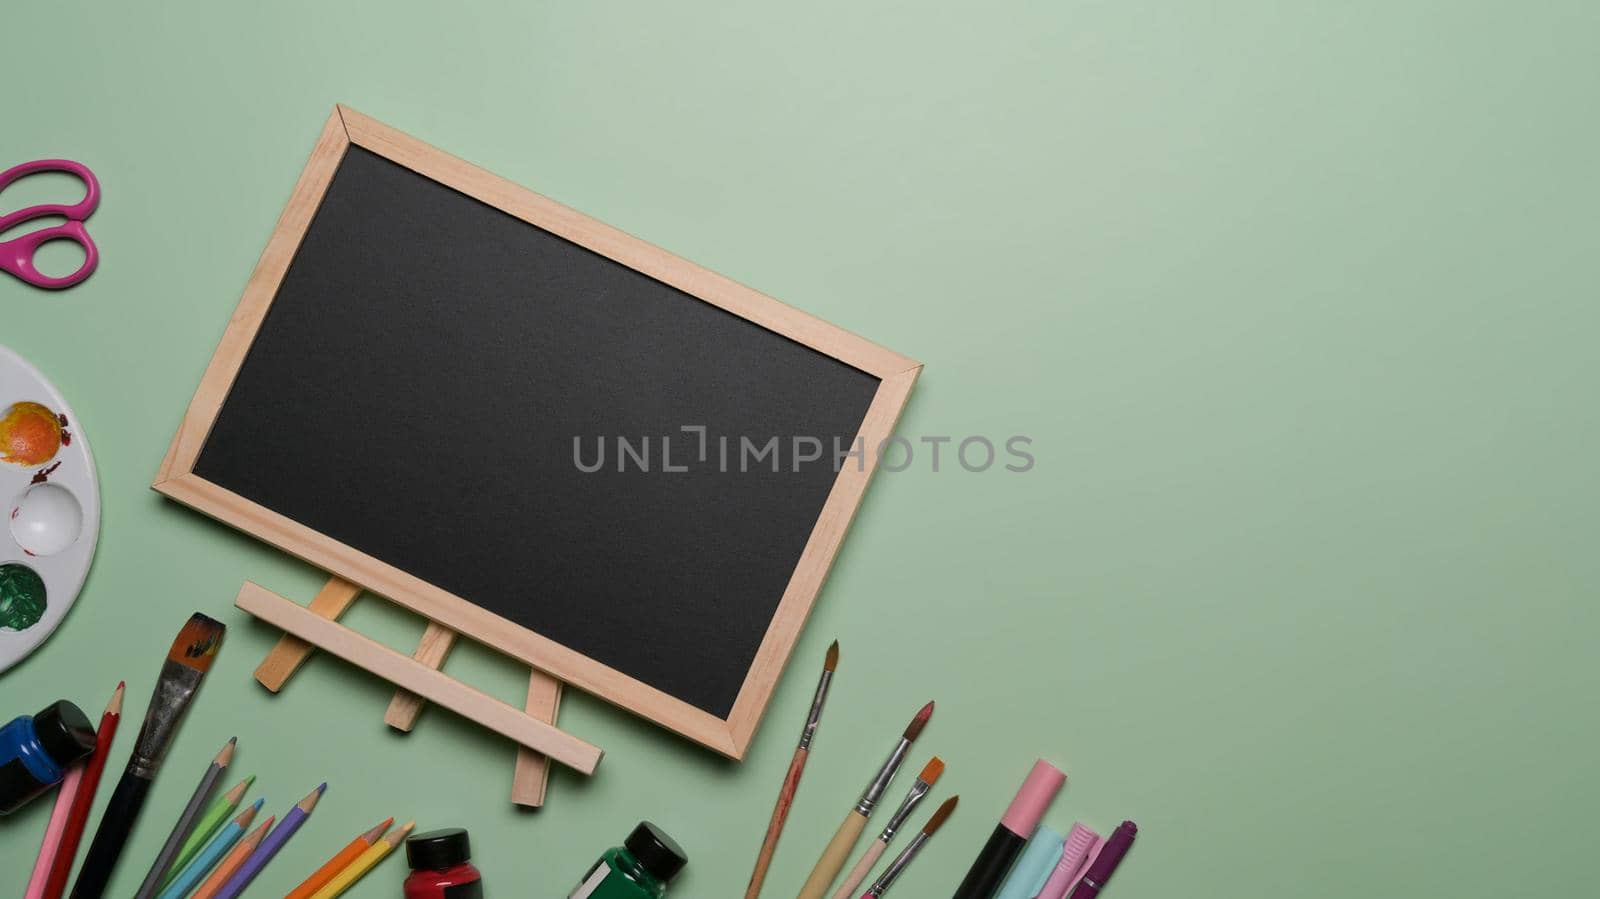 Flat lay empty chalkboard and school stationery on green background. Back to school concept.